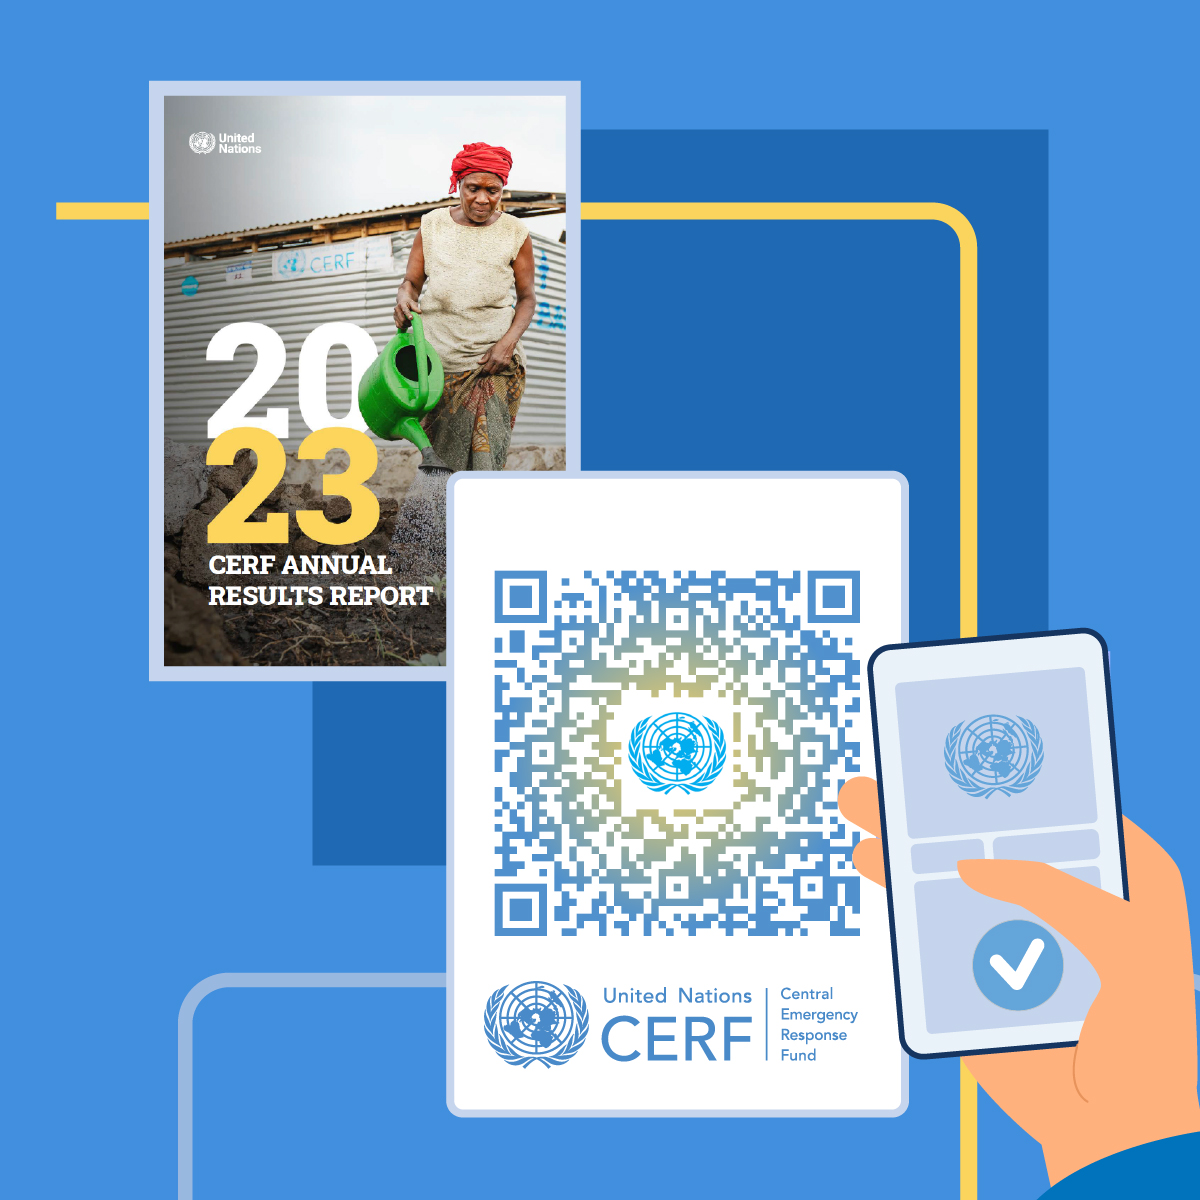 🤔How did @UNCERF life-saving humanitarian aid actually help those who needed it most in 2023? To learn more, you can now easily access our Annual Results Report through the QR code below📱⤵️ #InvestInHumanity